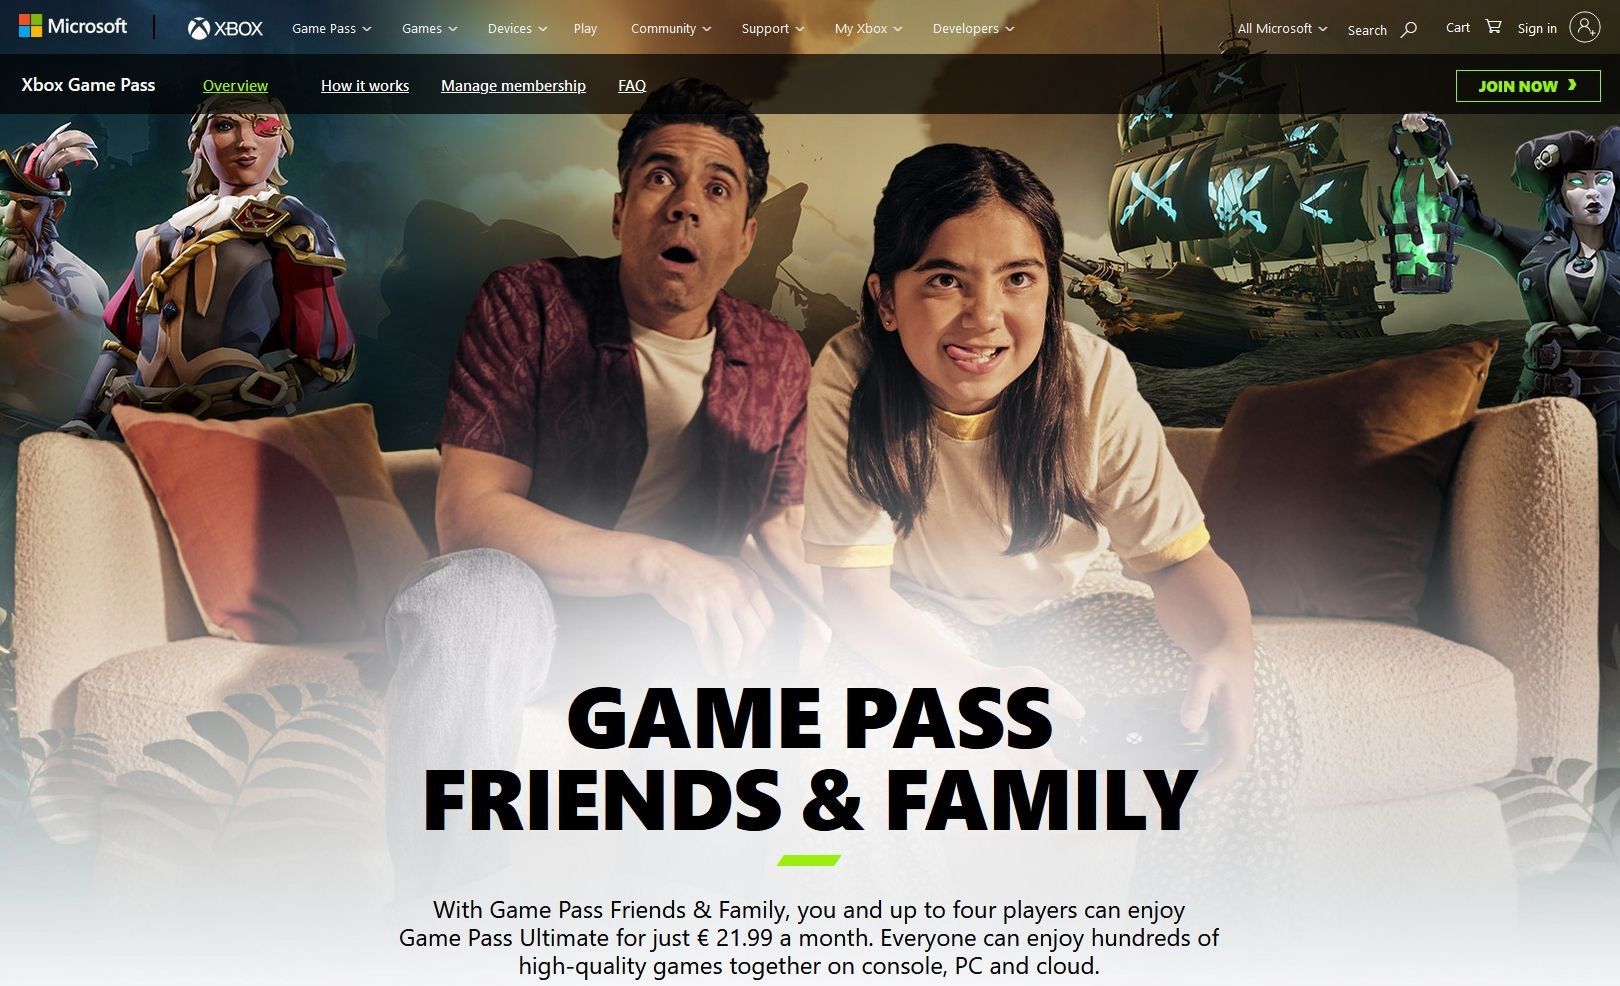 Game pass friends and family offre